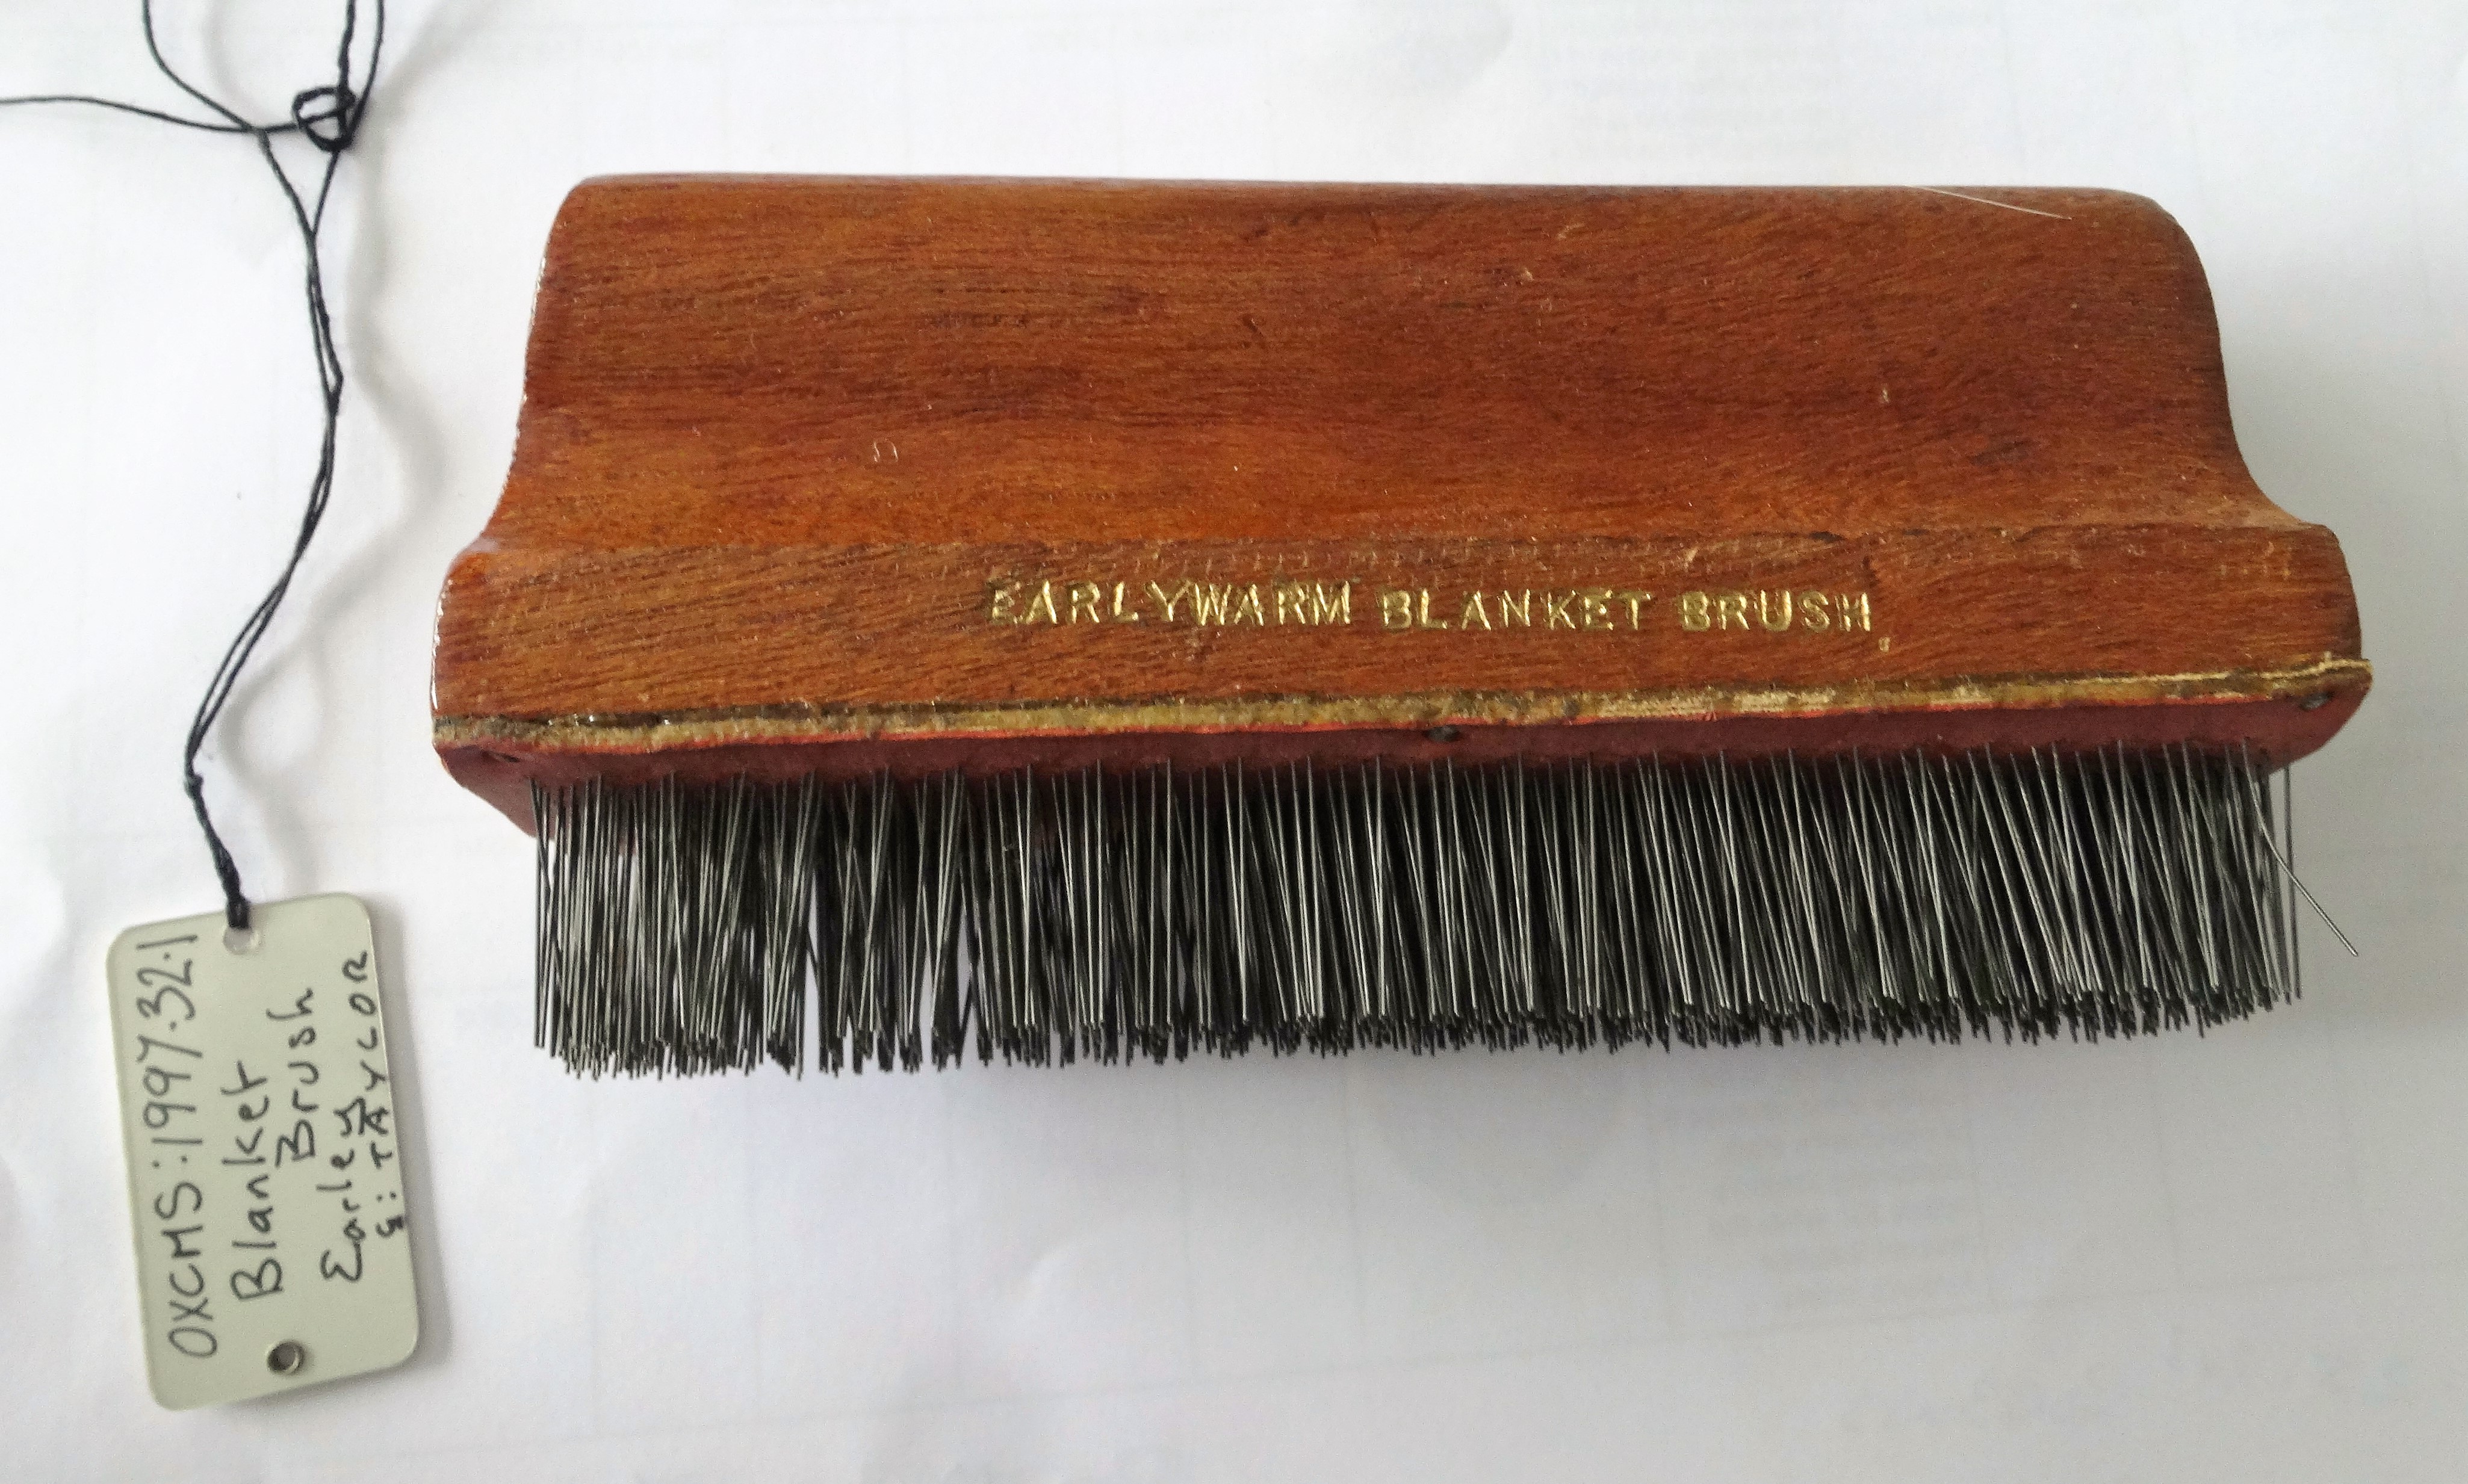 Witney blanket brush - Oxfordshire Museum resource centre